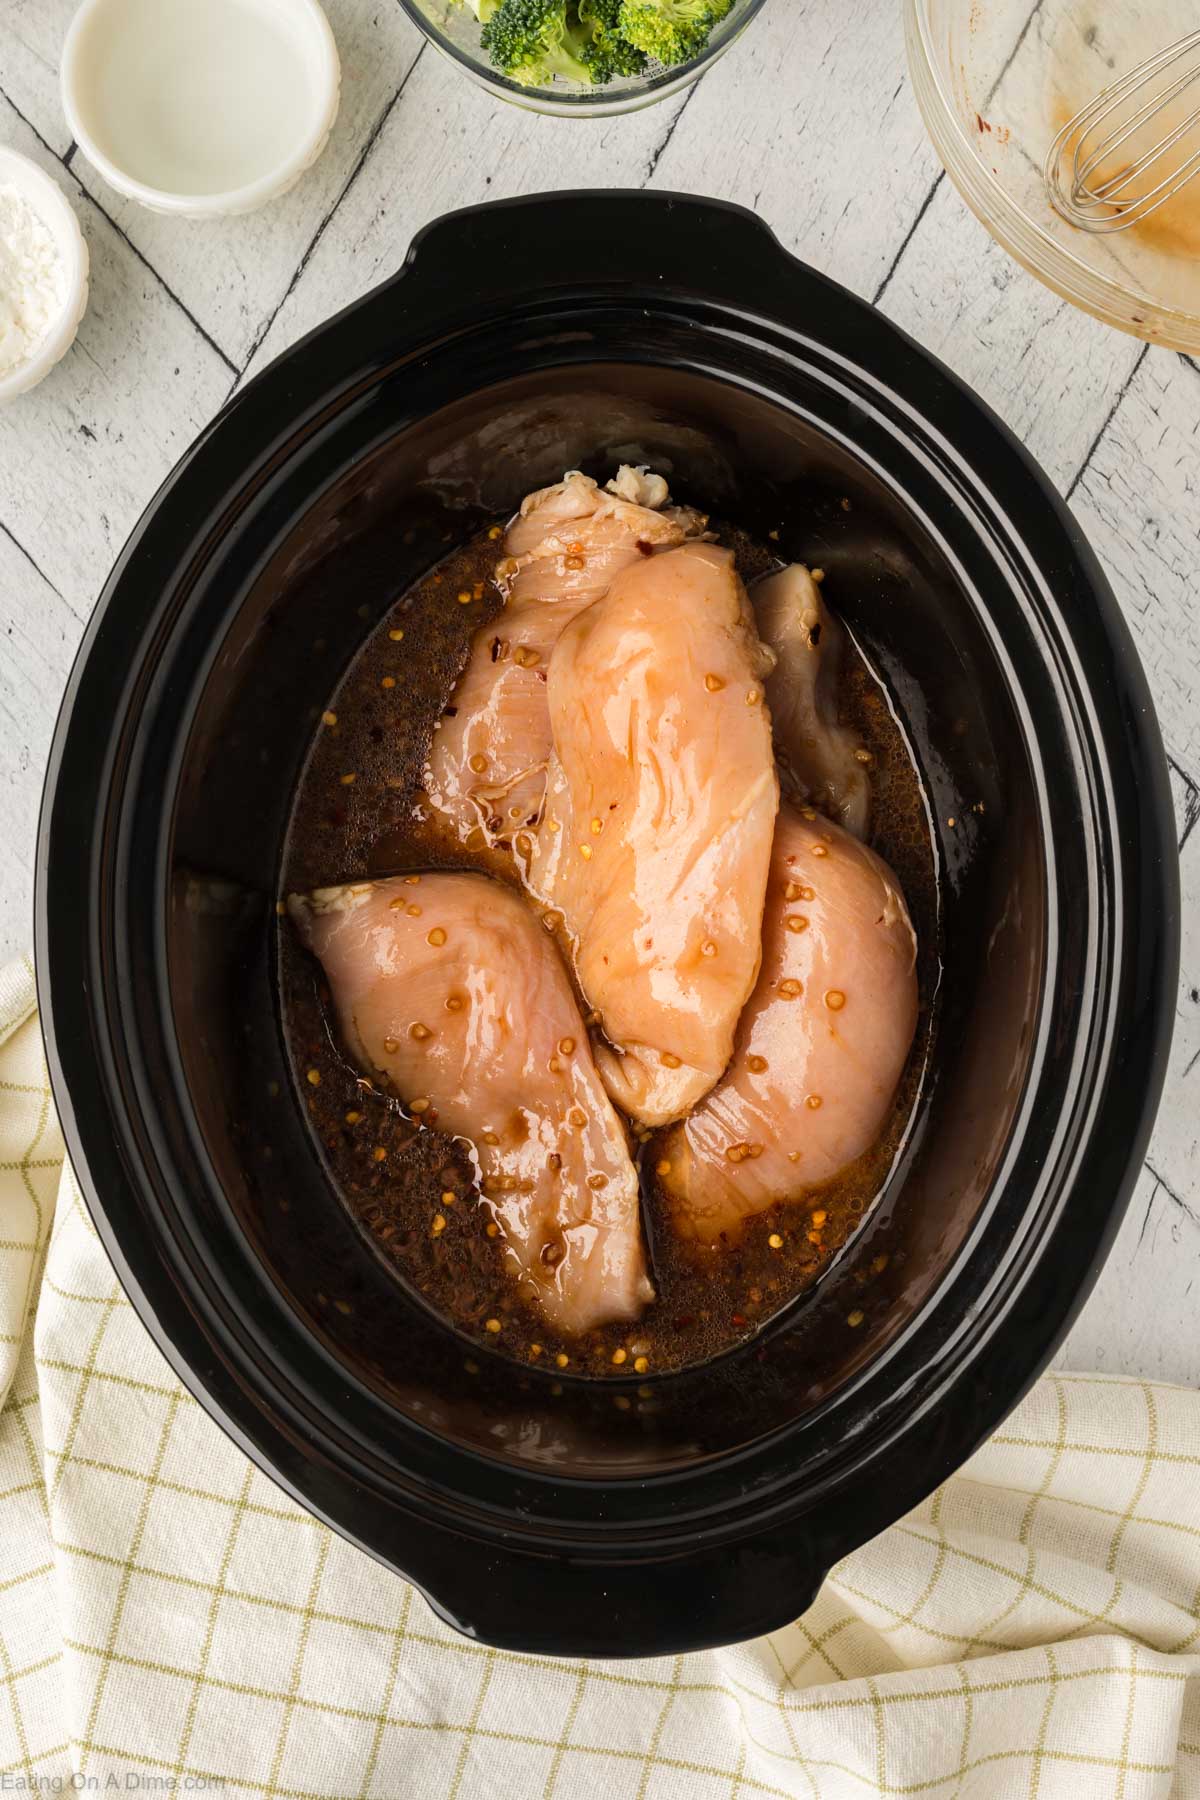 Pouring the sauce over the chicken in the slow cooker